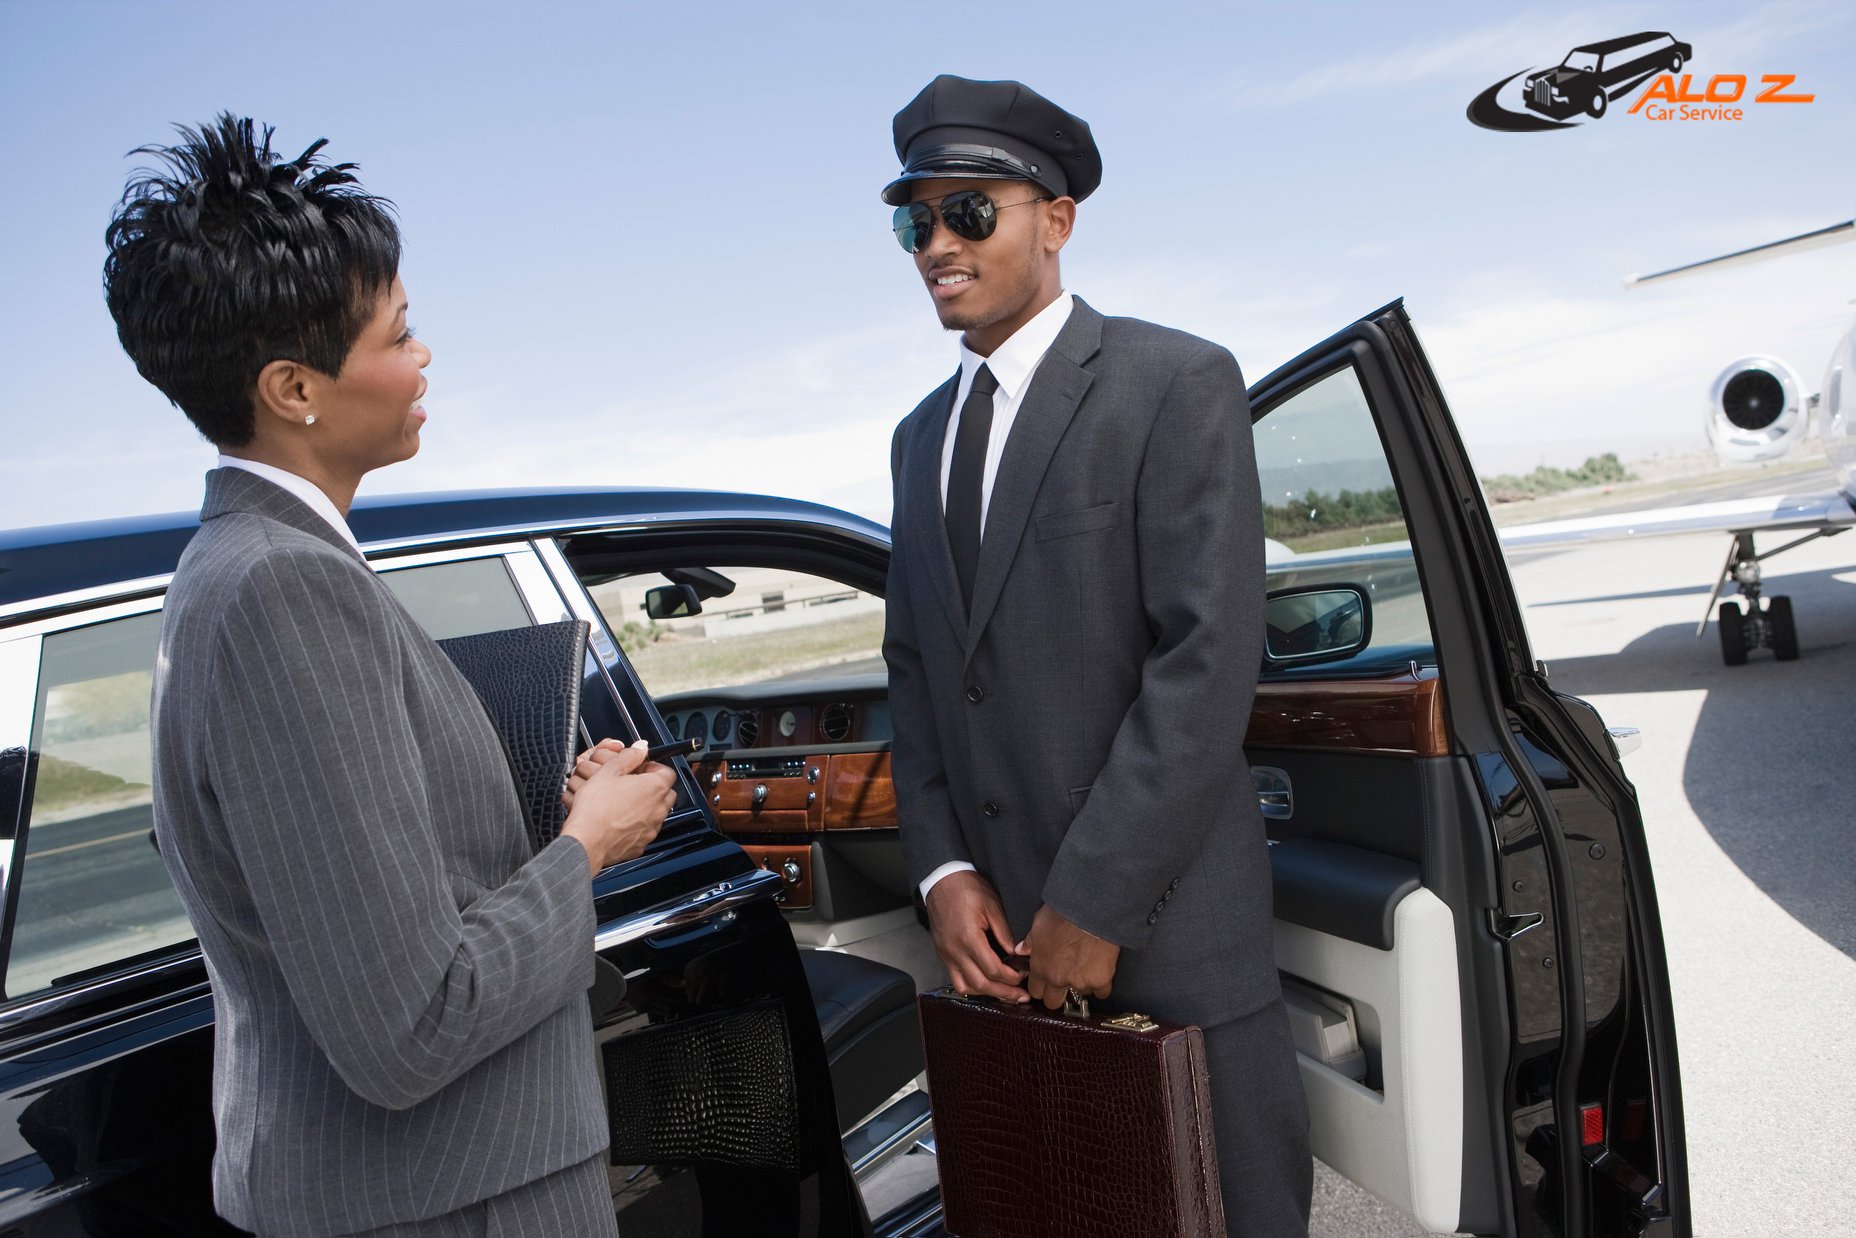 Get An Amazing Taxi Ride In New Jersey 732-742-2252